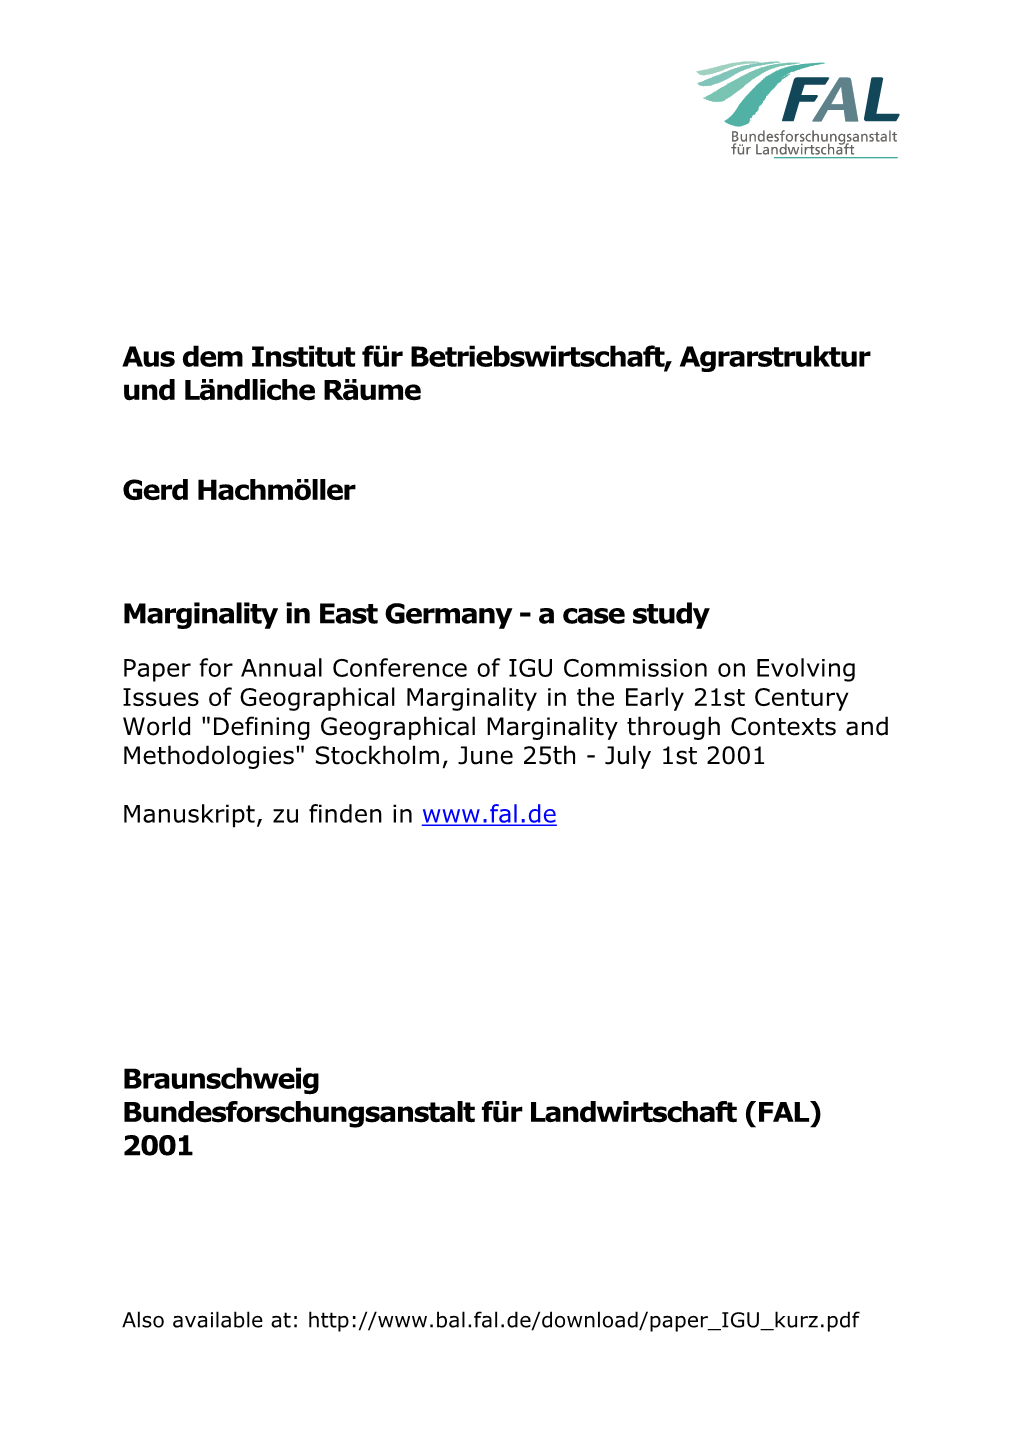 Marginality in East Germany - a Case Study